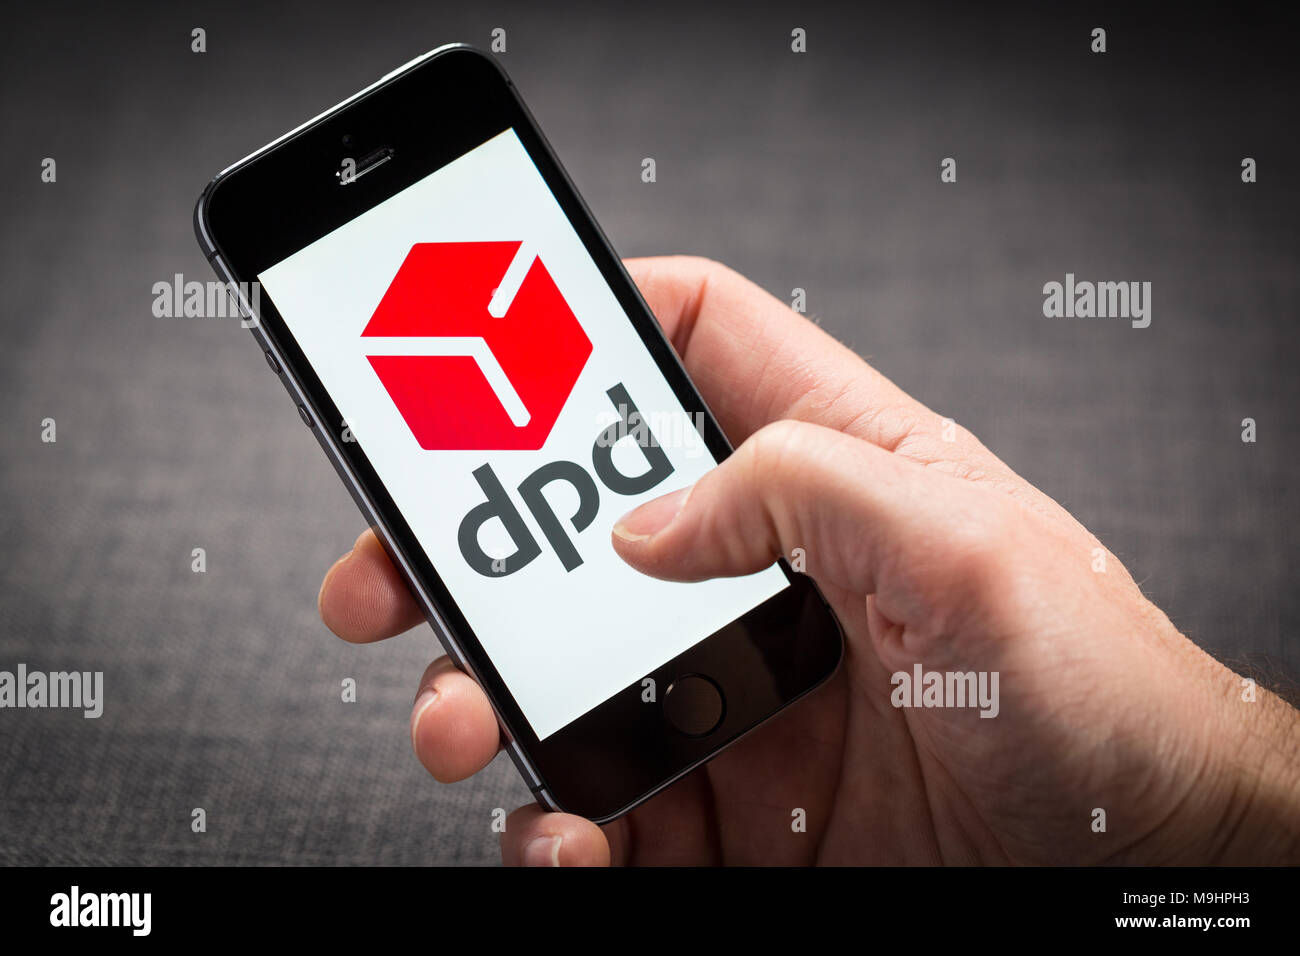 dpd delivery app on an iPhone Stock Photo - Alamy